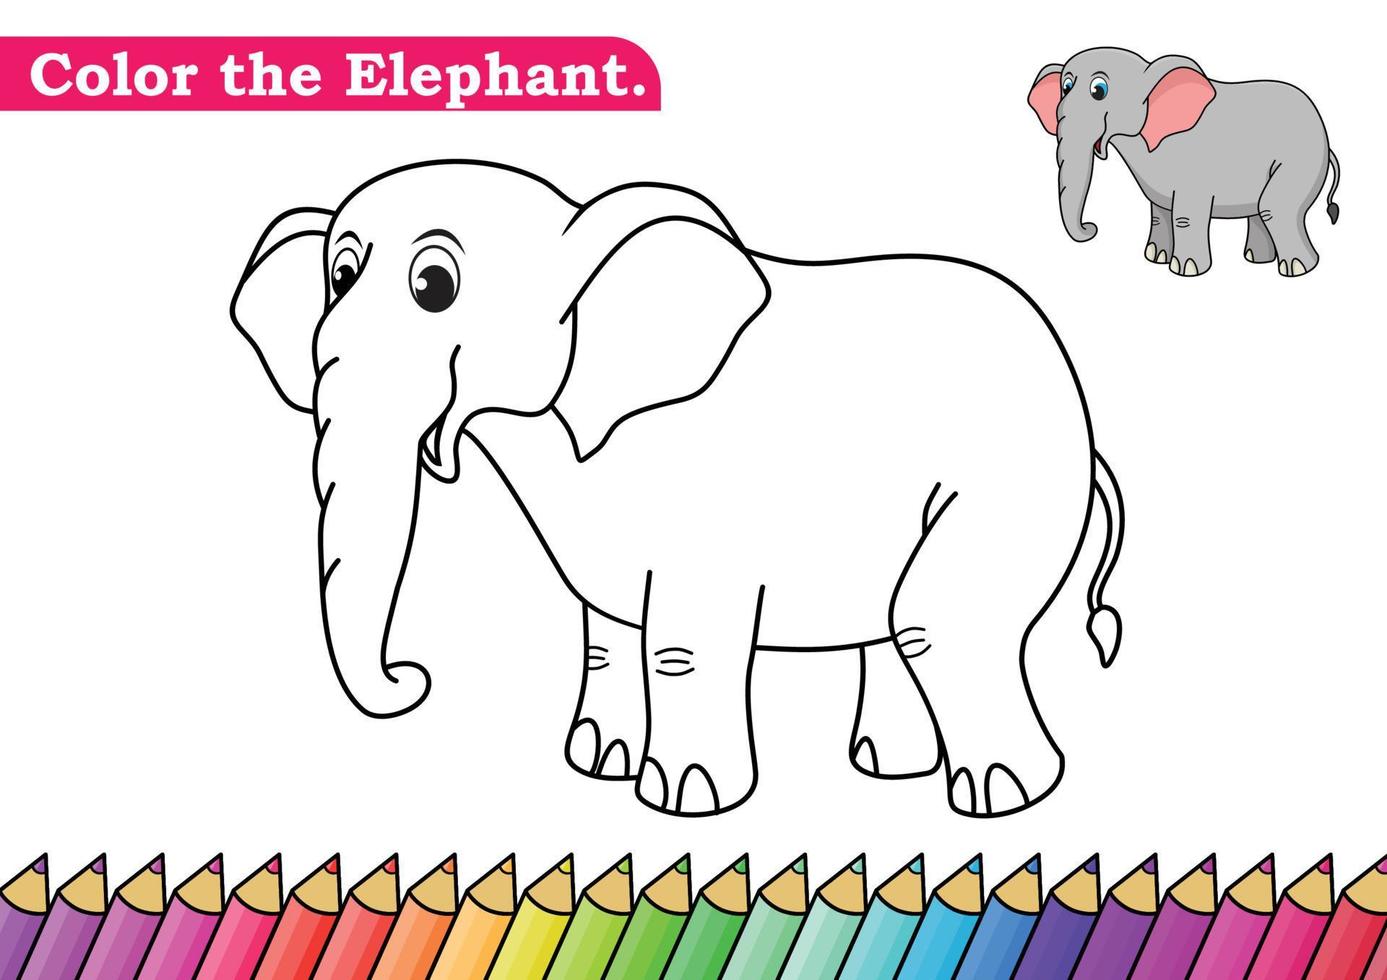 Coloring page for Elephant vector illustration.  Kindergarten children Coloring pages activity worksheet with funny big Elephant cartoon.  Elephant isolated on white background for color books.